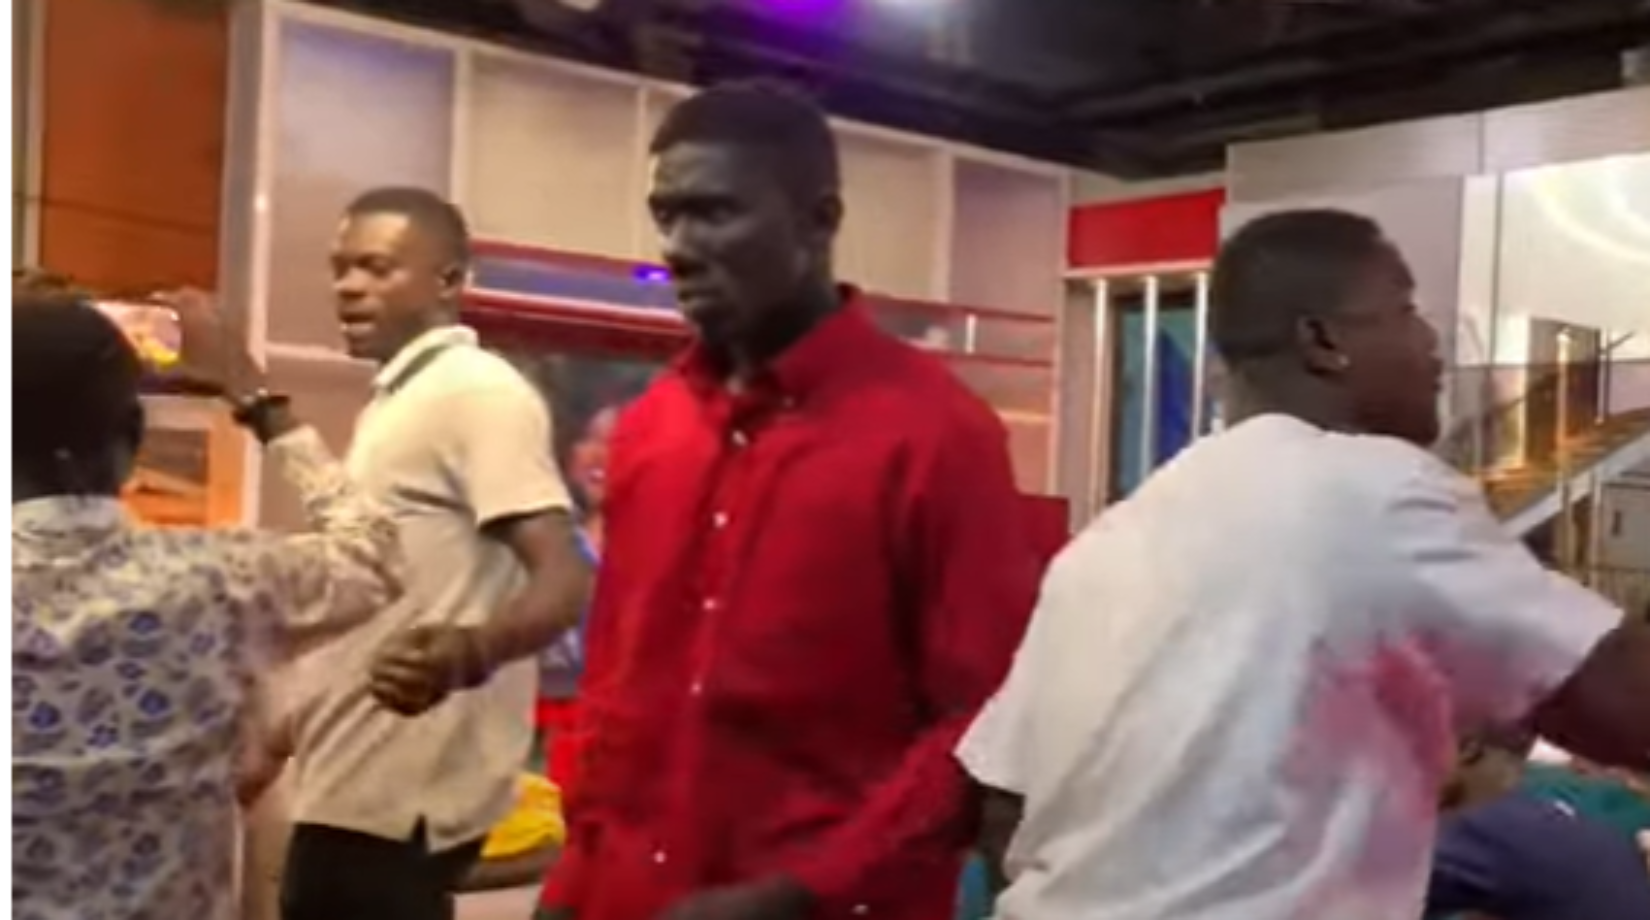 Spotlight on why NPP ‘hooligans’ stormed UTV studio and disrupted live show